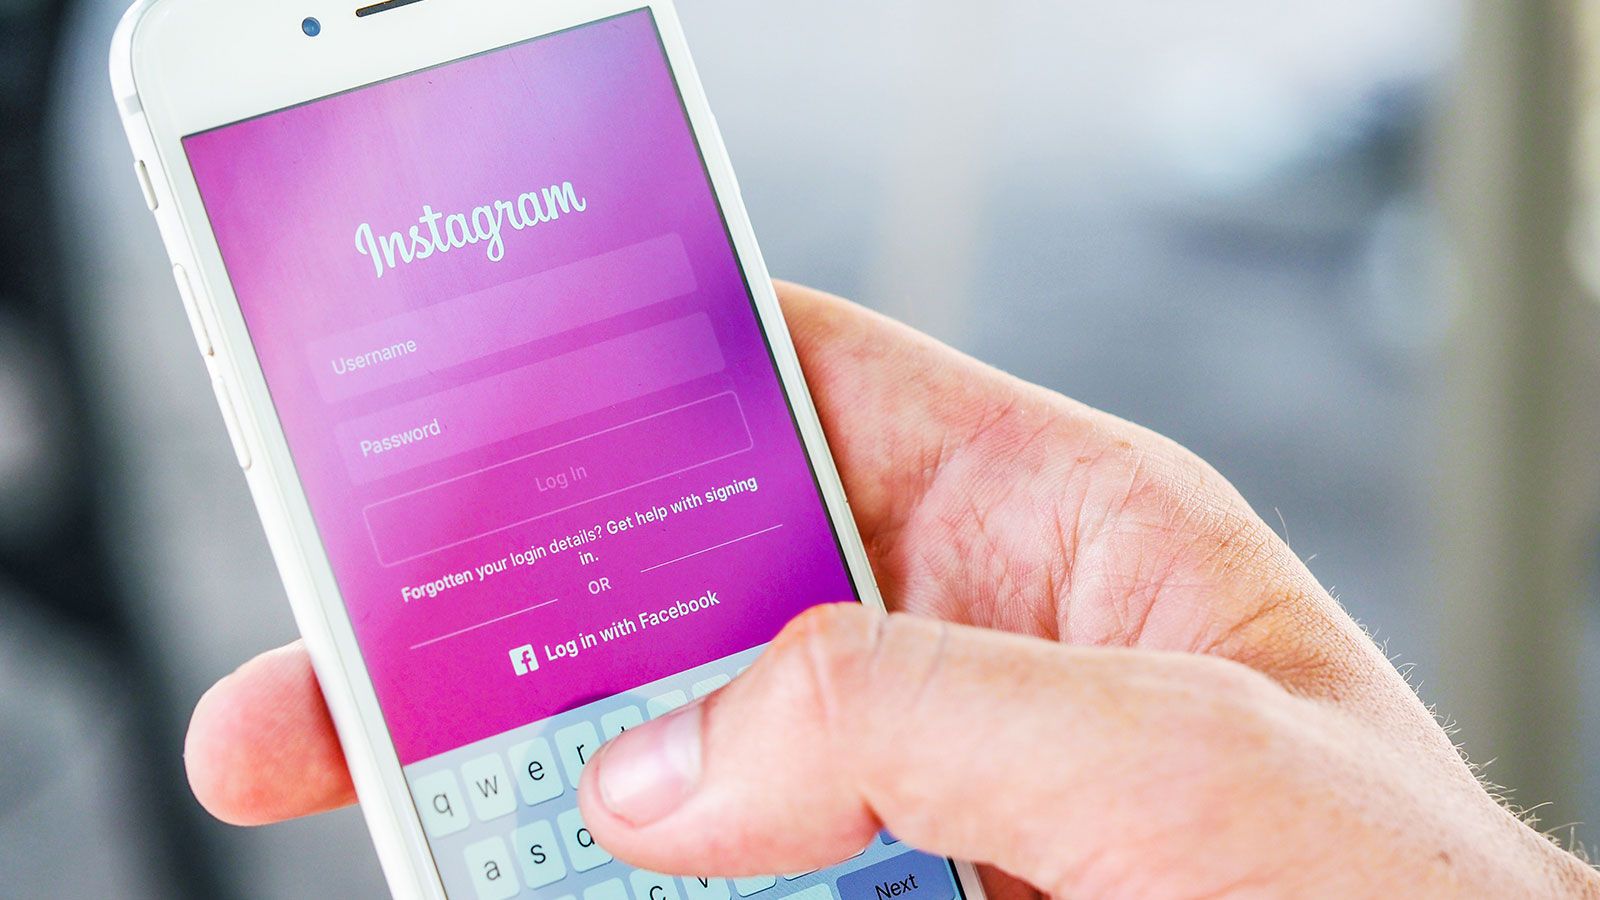 How to Fix Instagram "Your Account Has Been Temporarily Locked"